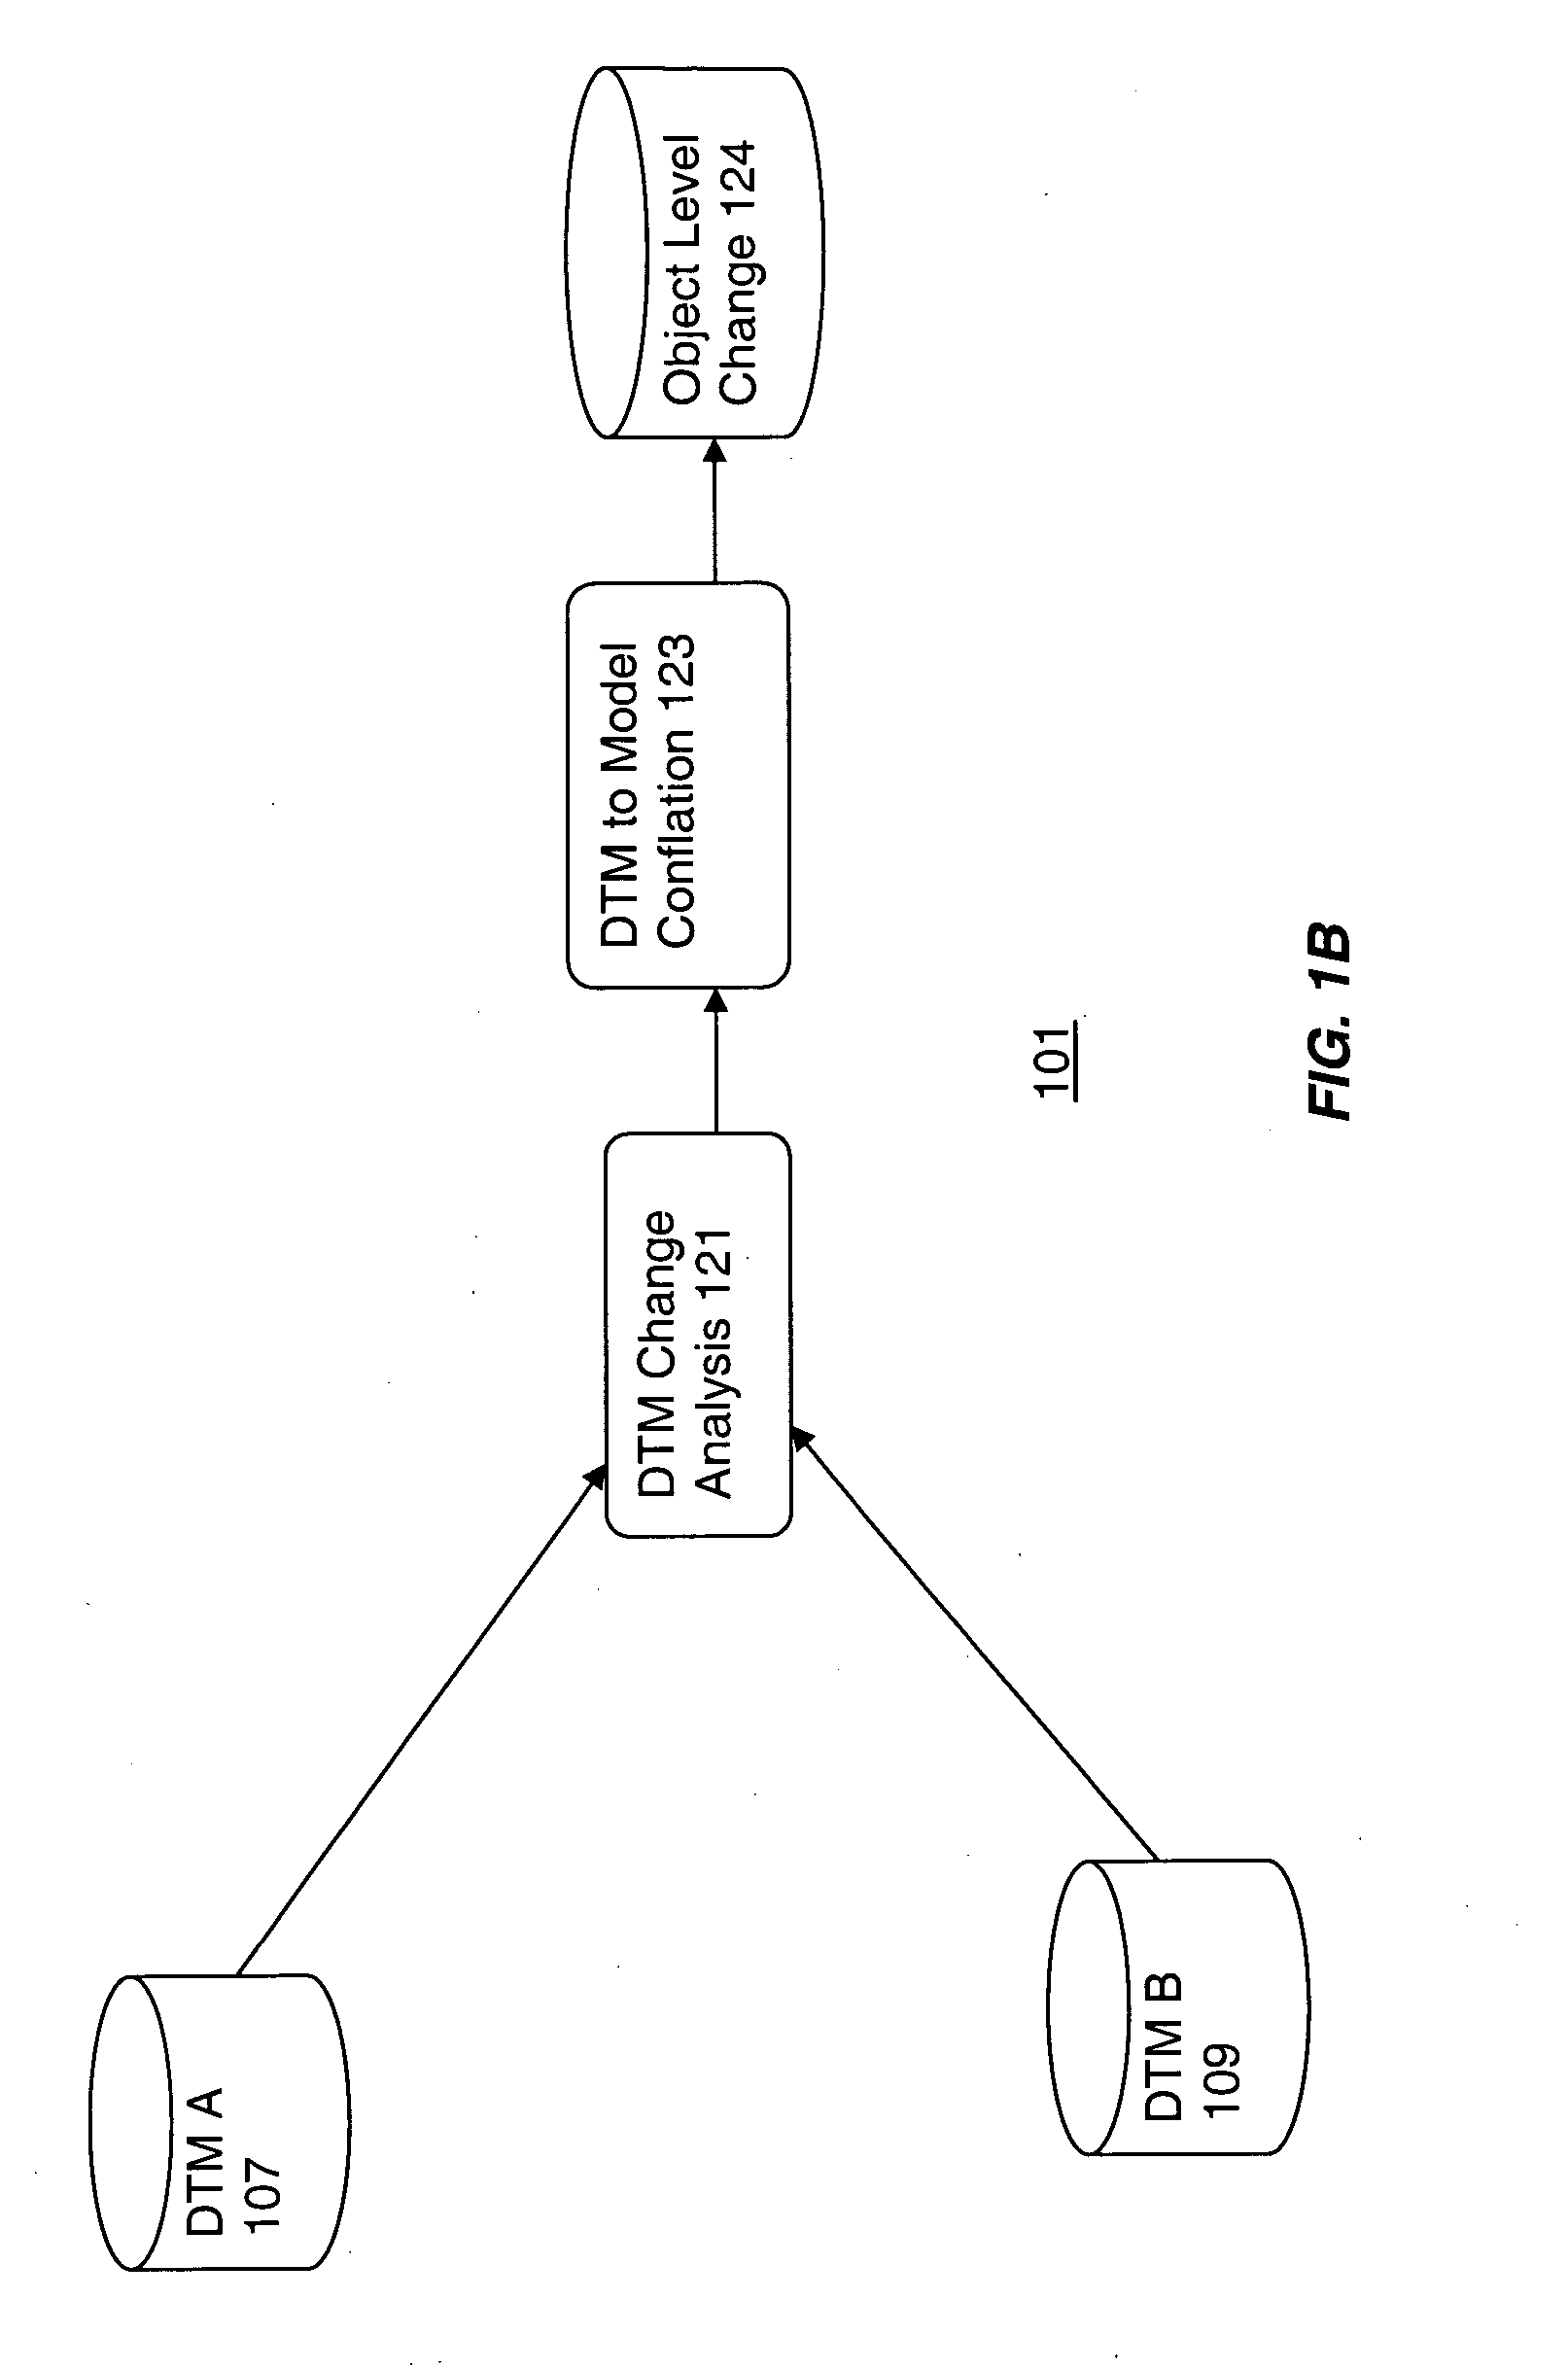 System and method for three dimensional change detection and measurement of a scene using change analysis